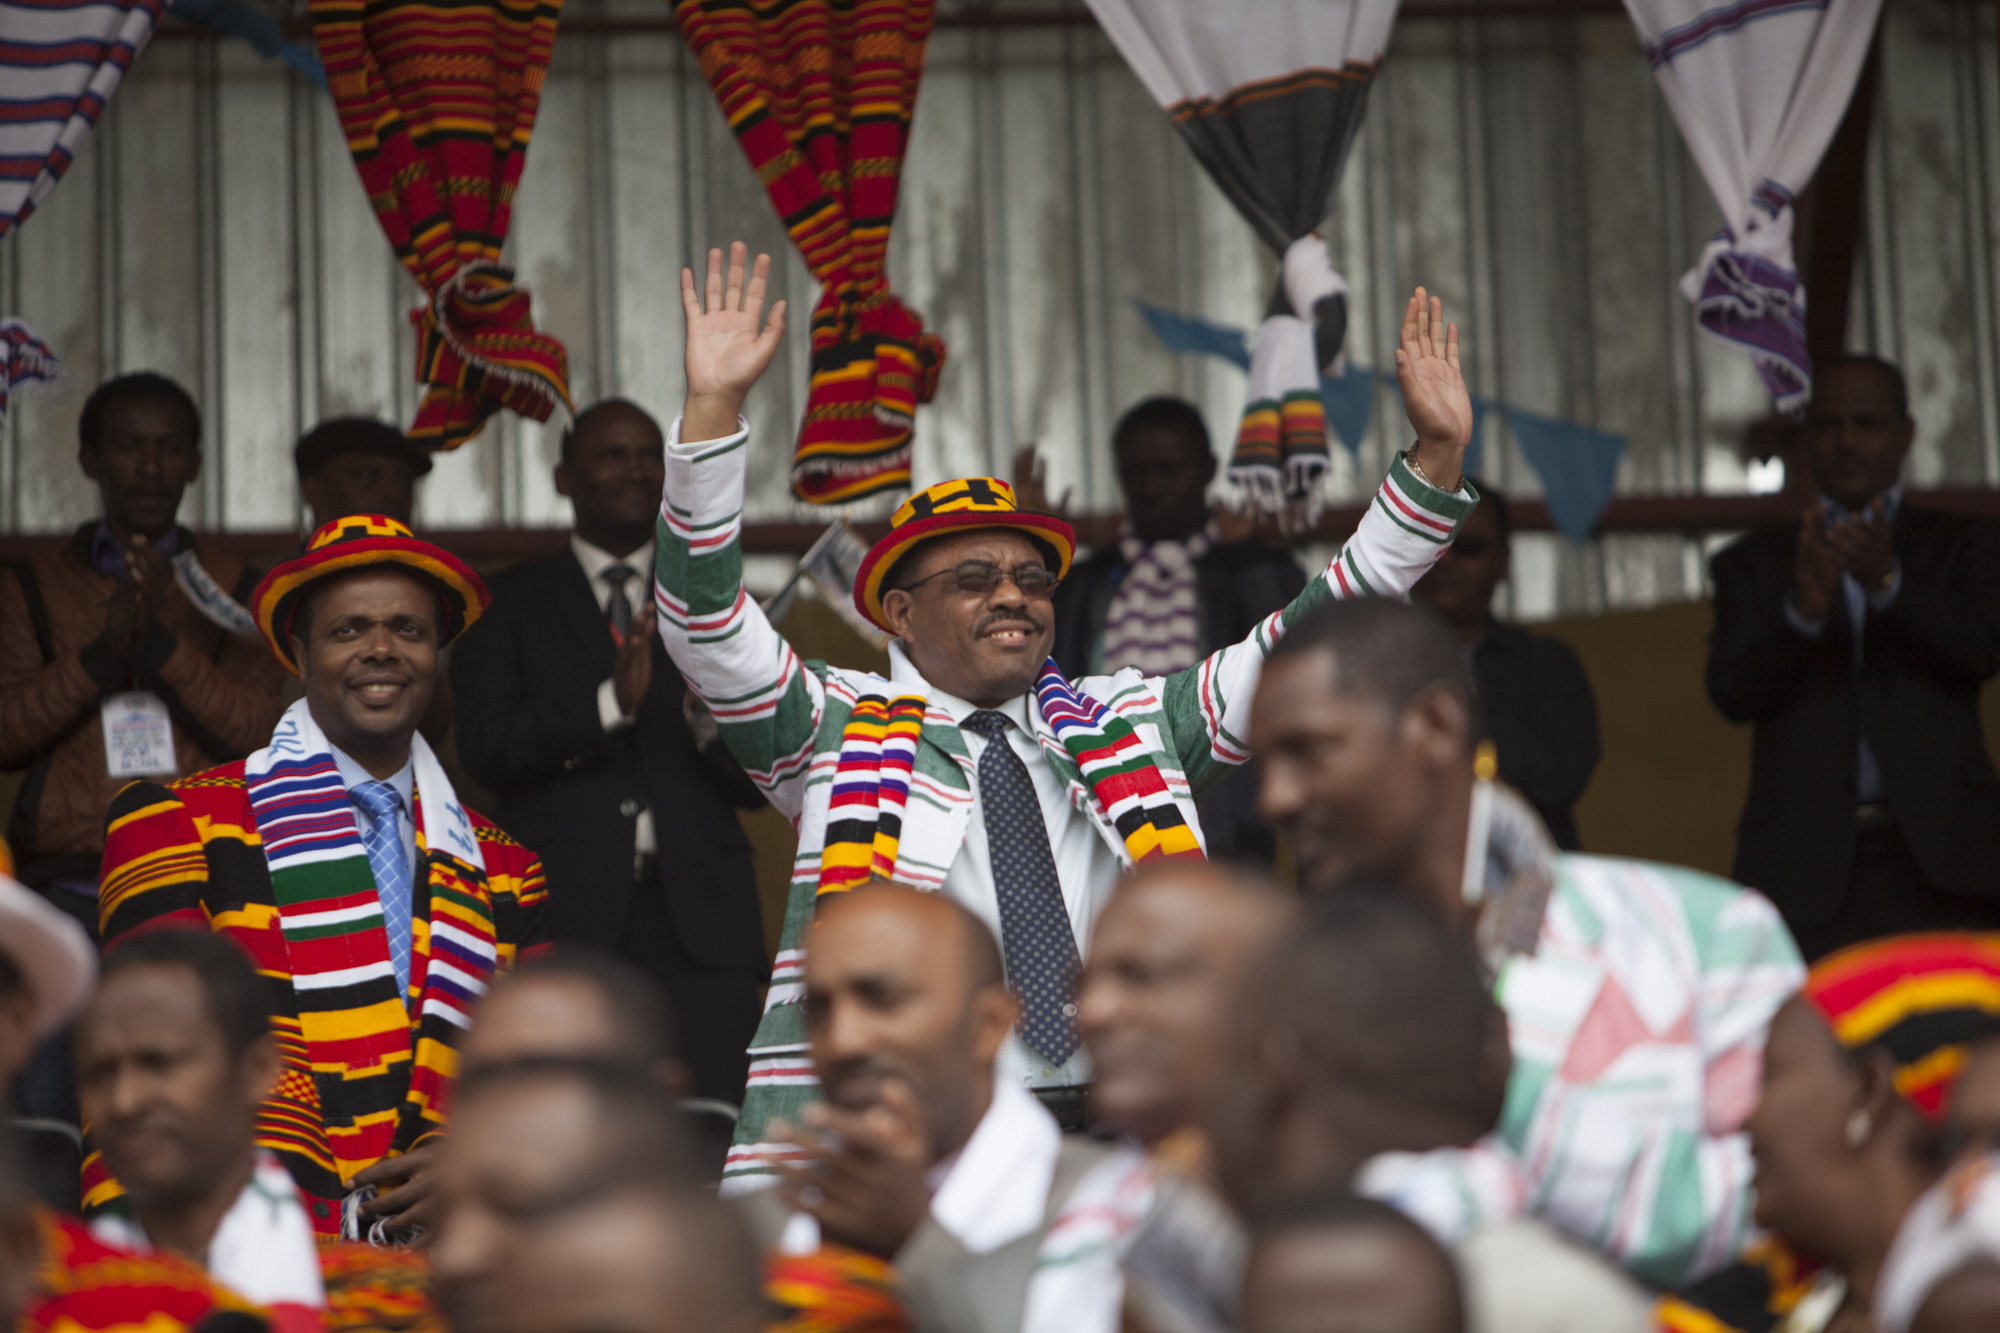  Hailemariam Dessalign is pictured during the 50 year anniversary celebration of the formation of Arba Minch town, part of the Southerm Nation’s Nationalities and Peoples region of Ethiopia, on September 6 2014. Arba Minch celebrated it’s 50th birthd